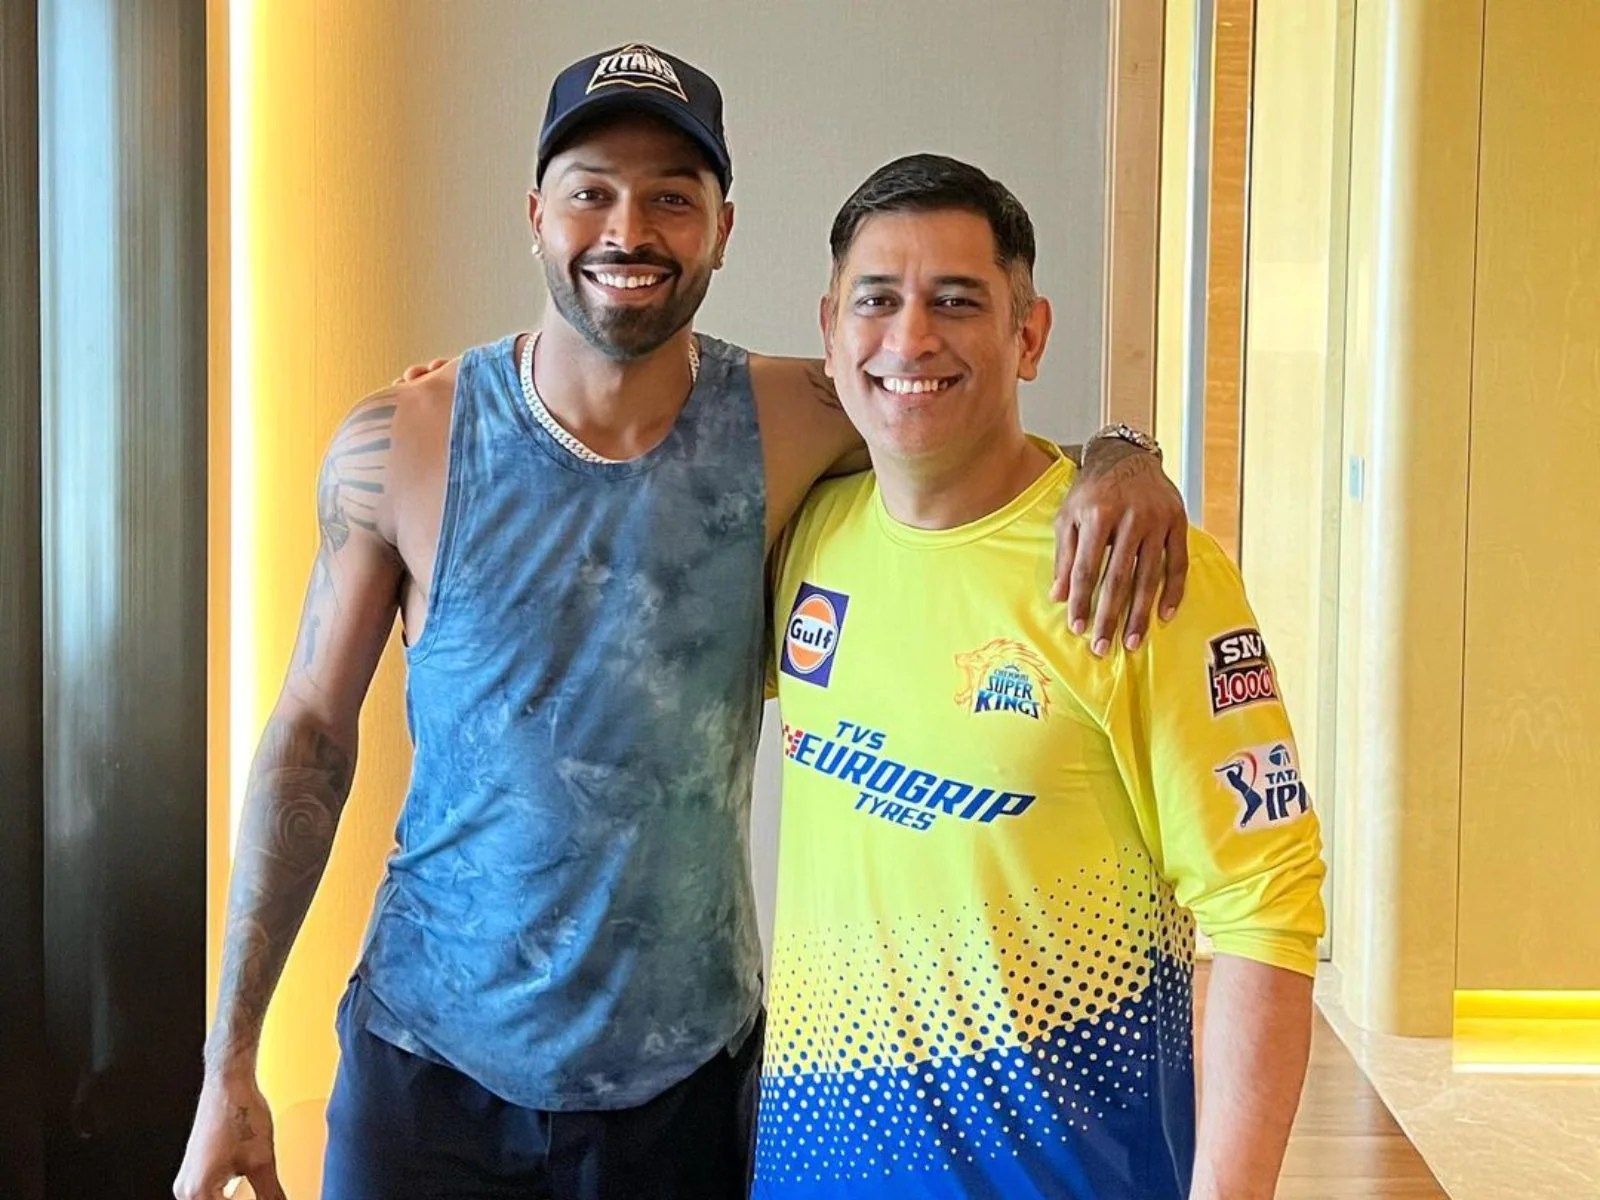 Hardik Pandya MSD: 'Since Mahi is gone, Responsibility has come to me' WATCH as Hardik remembers former India captain MS Dhoni after winning NZ T20 series